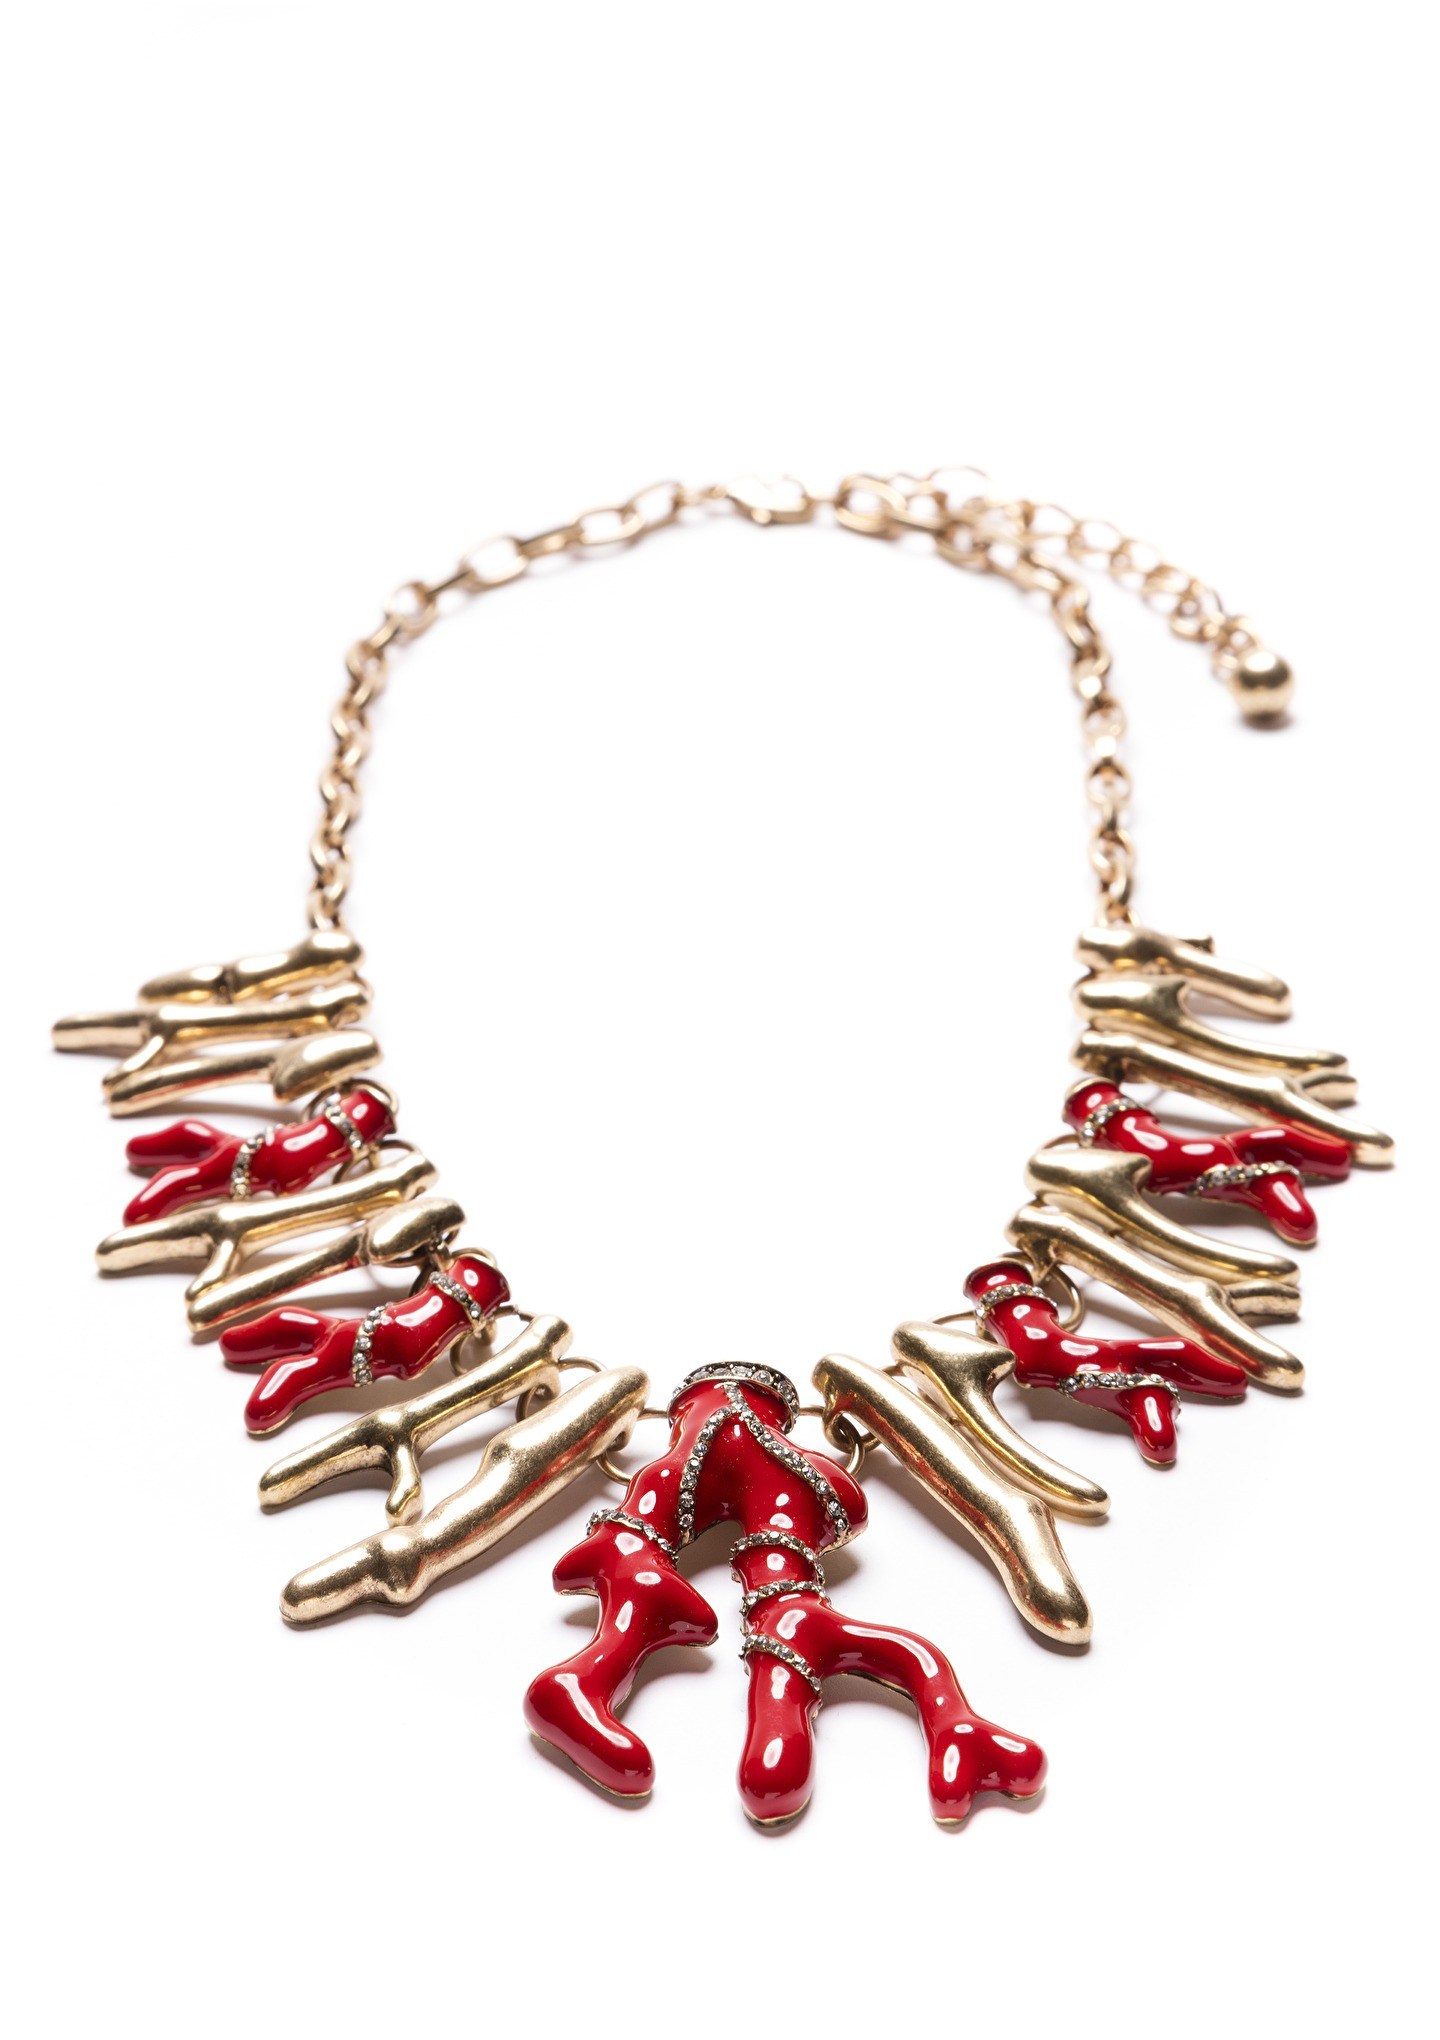 Coral Statement Necklace
 Coral Fortune Statement Necklace in Red and Gold